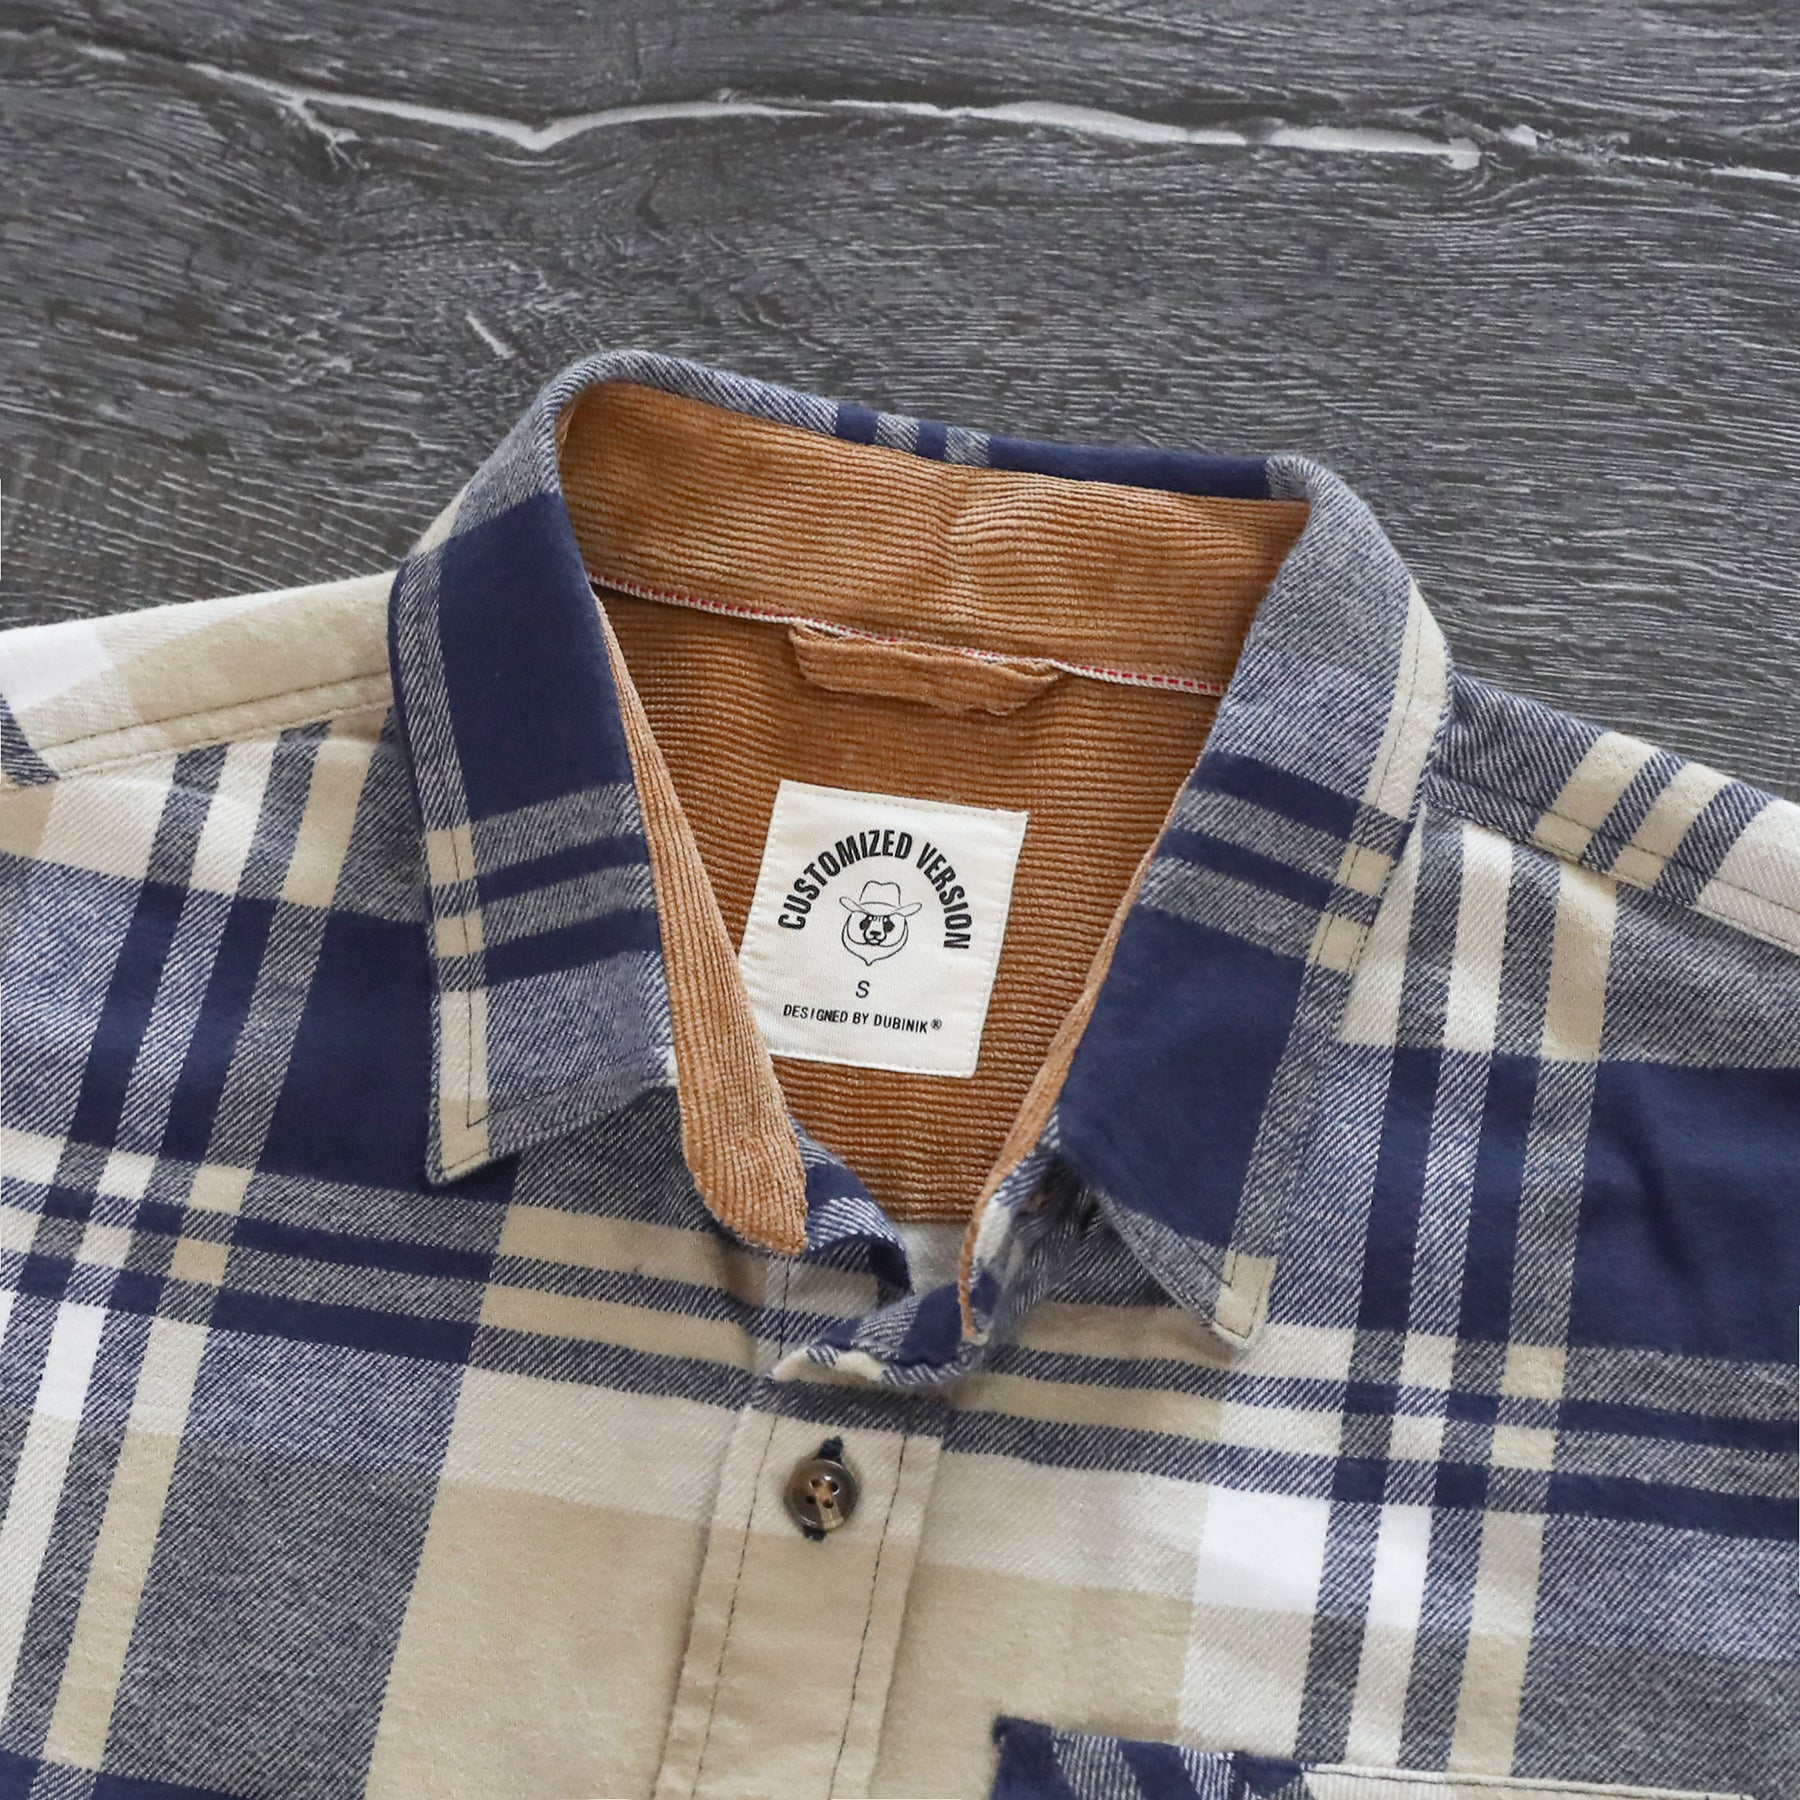 Mens Flannel Shirts Long Sleeve Casual #1003